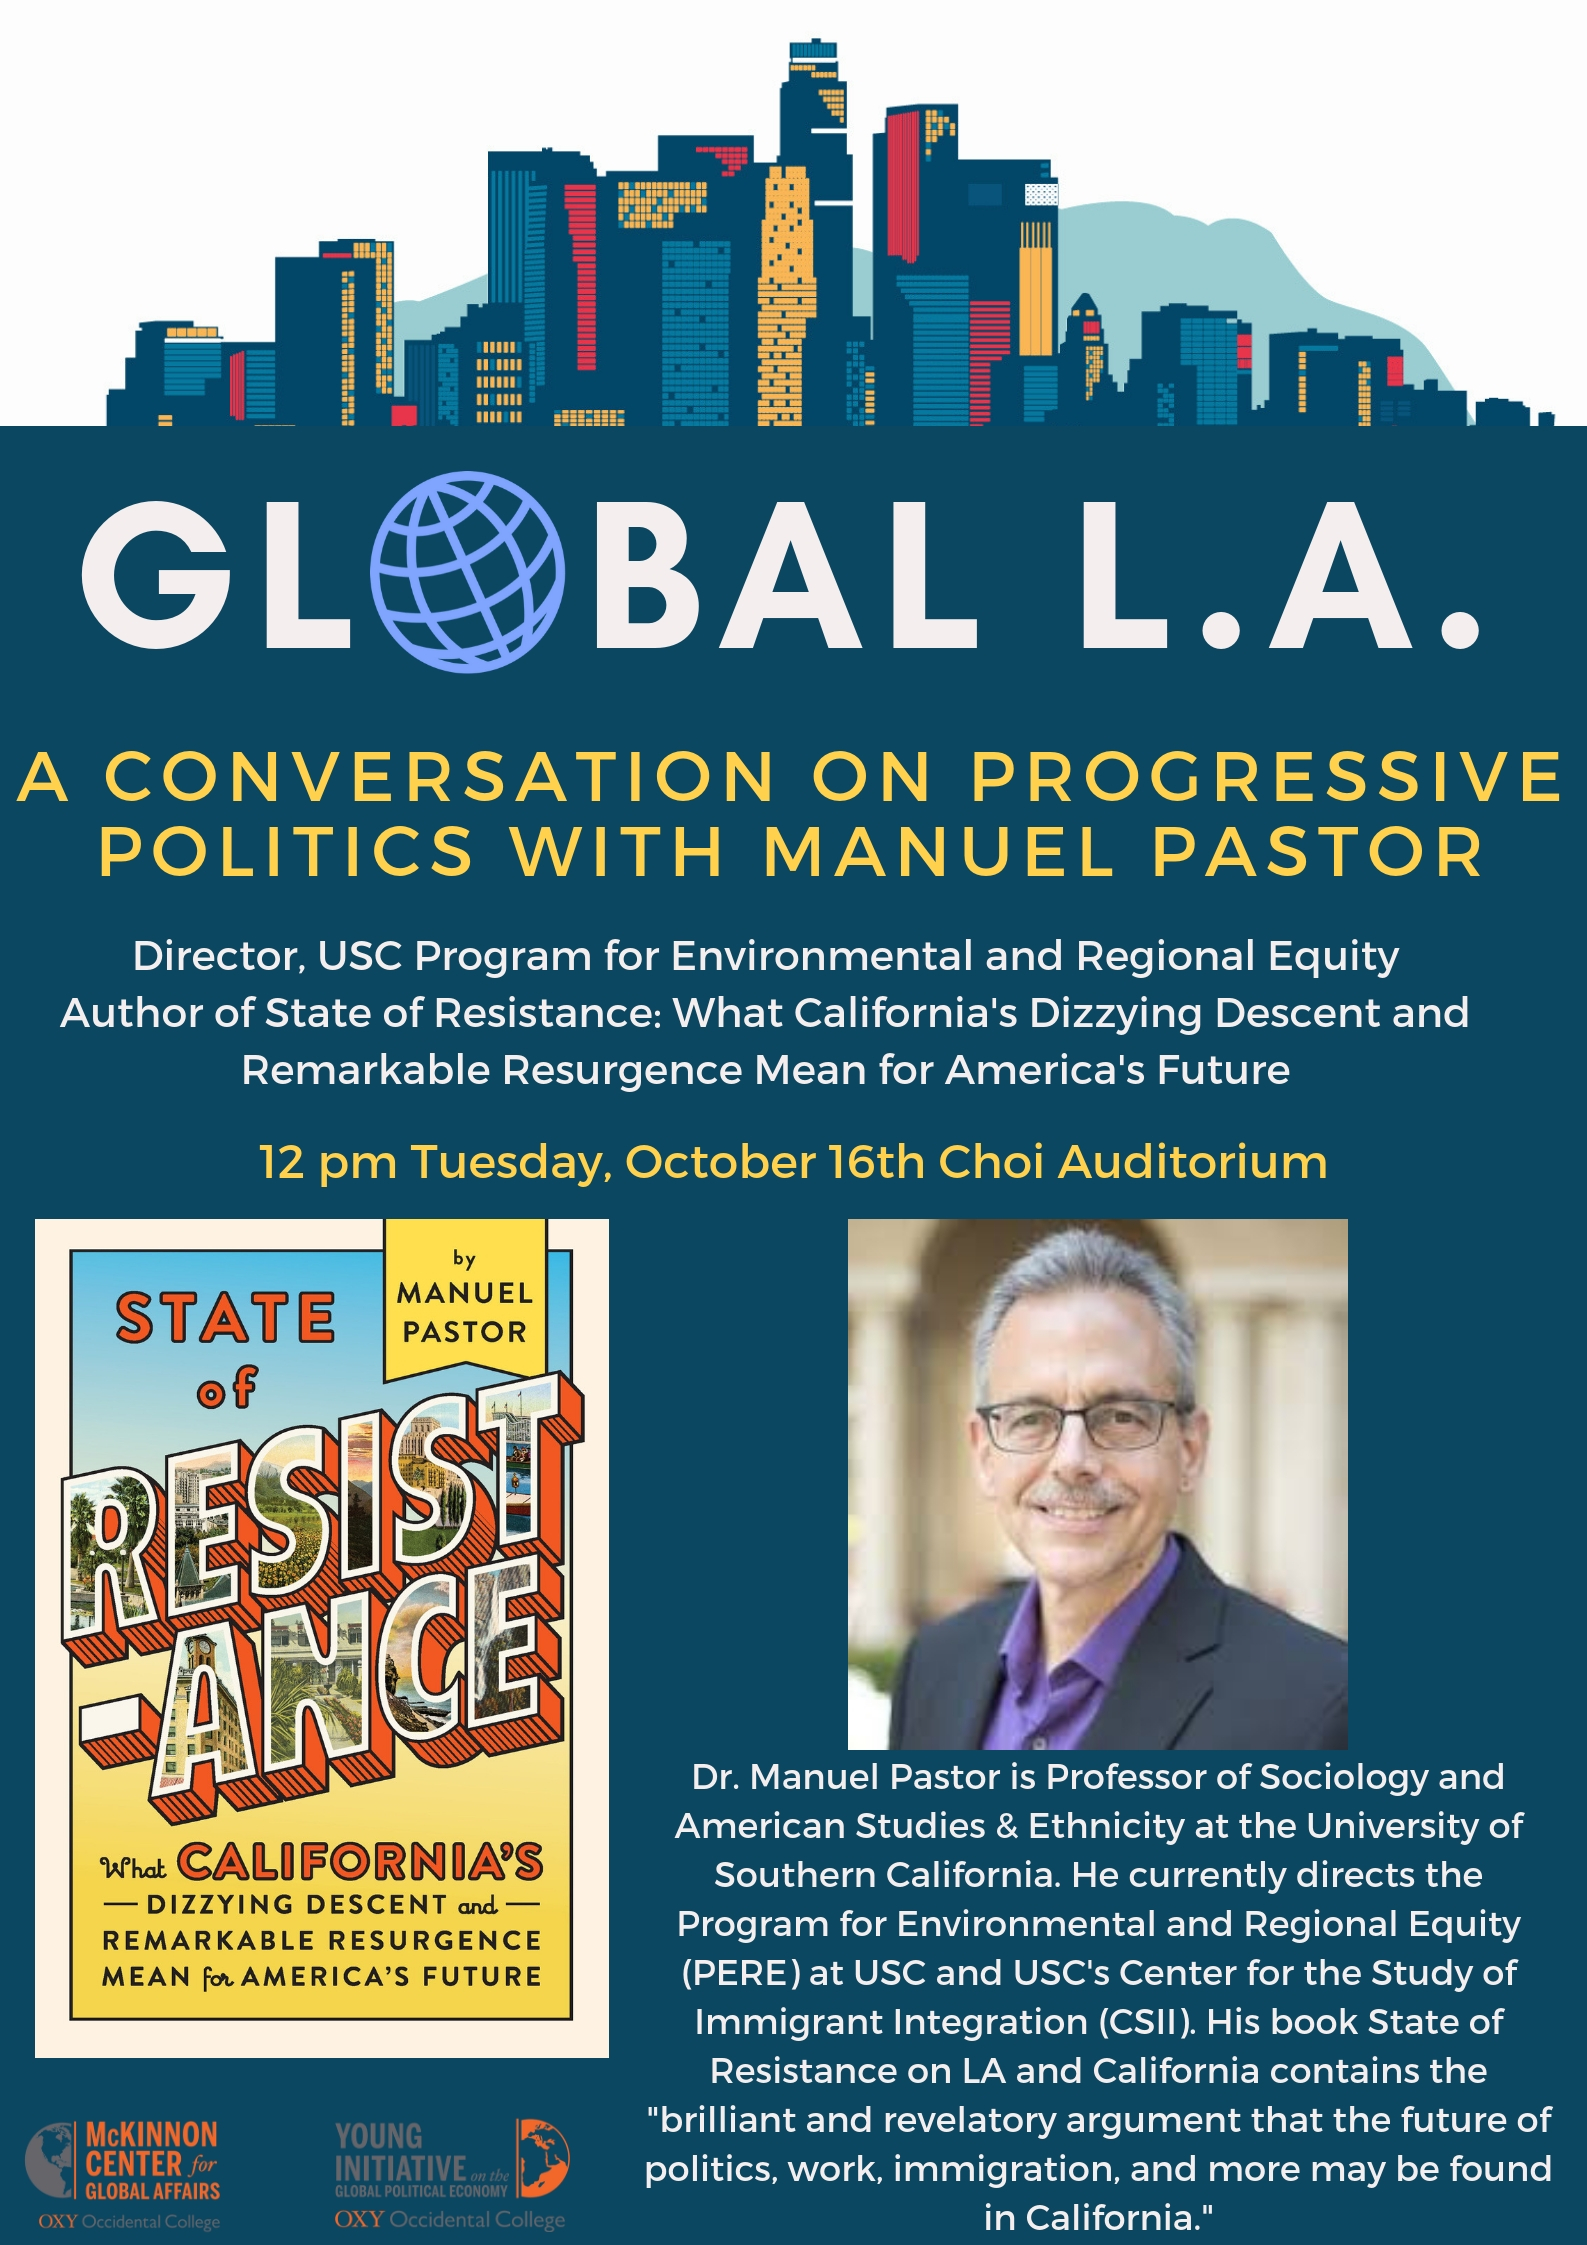 Image for Global L.A. with Manuel Pastor Event